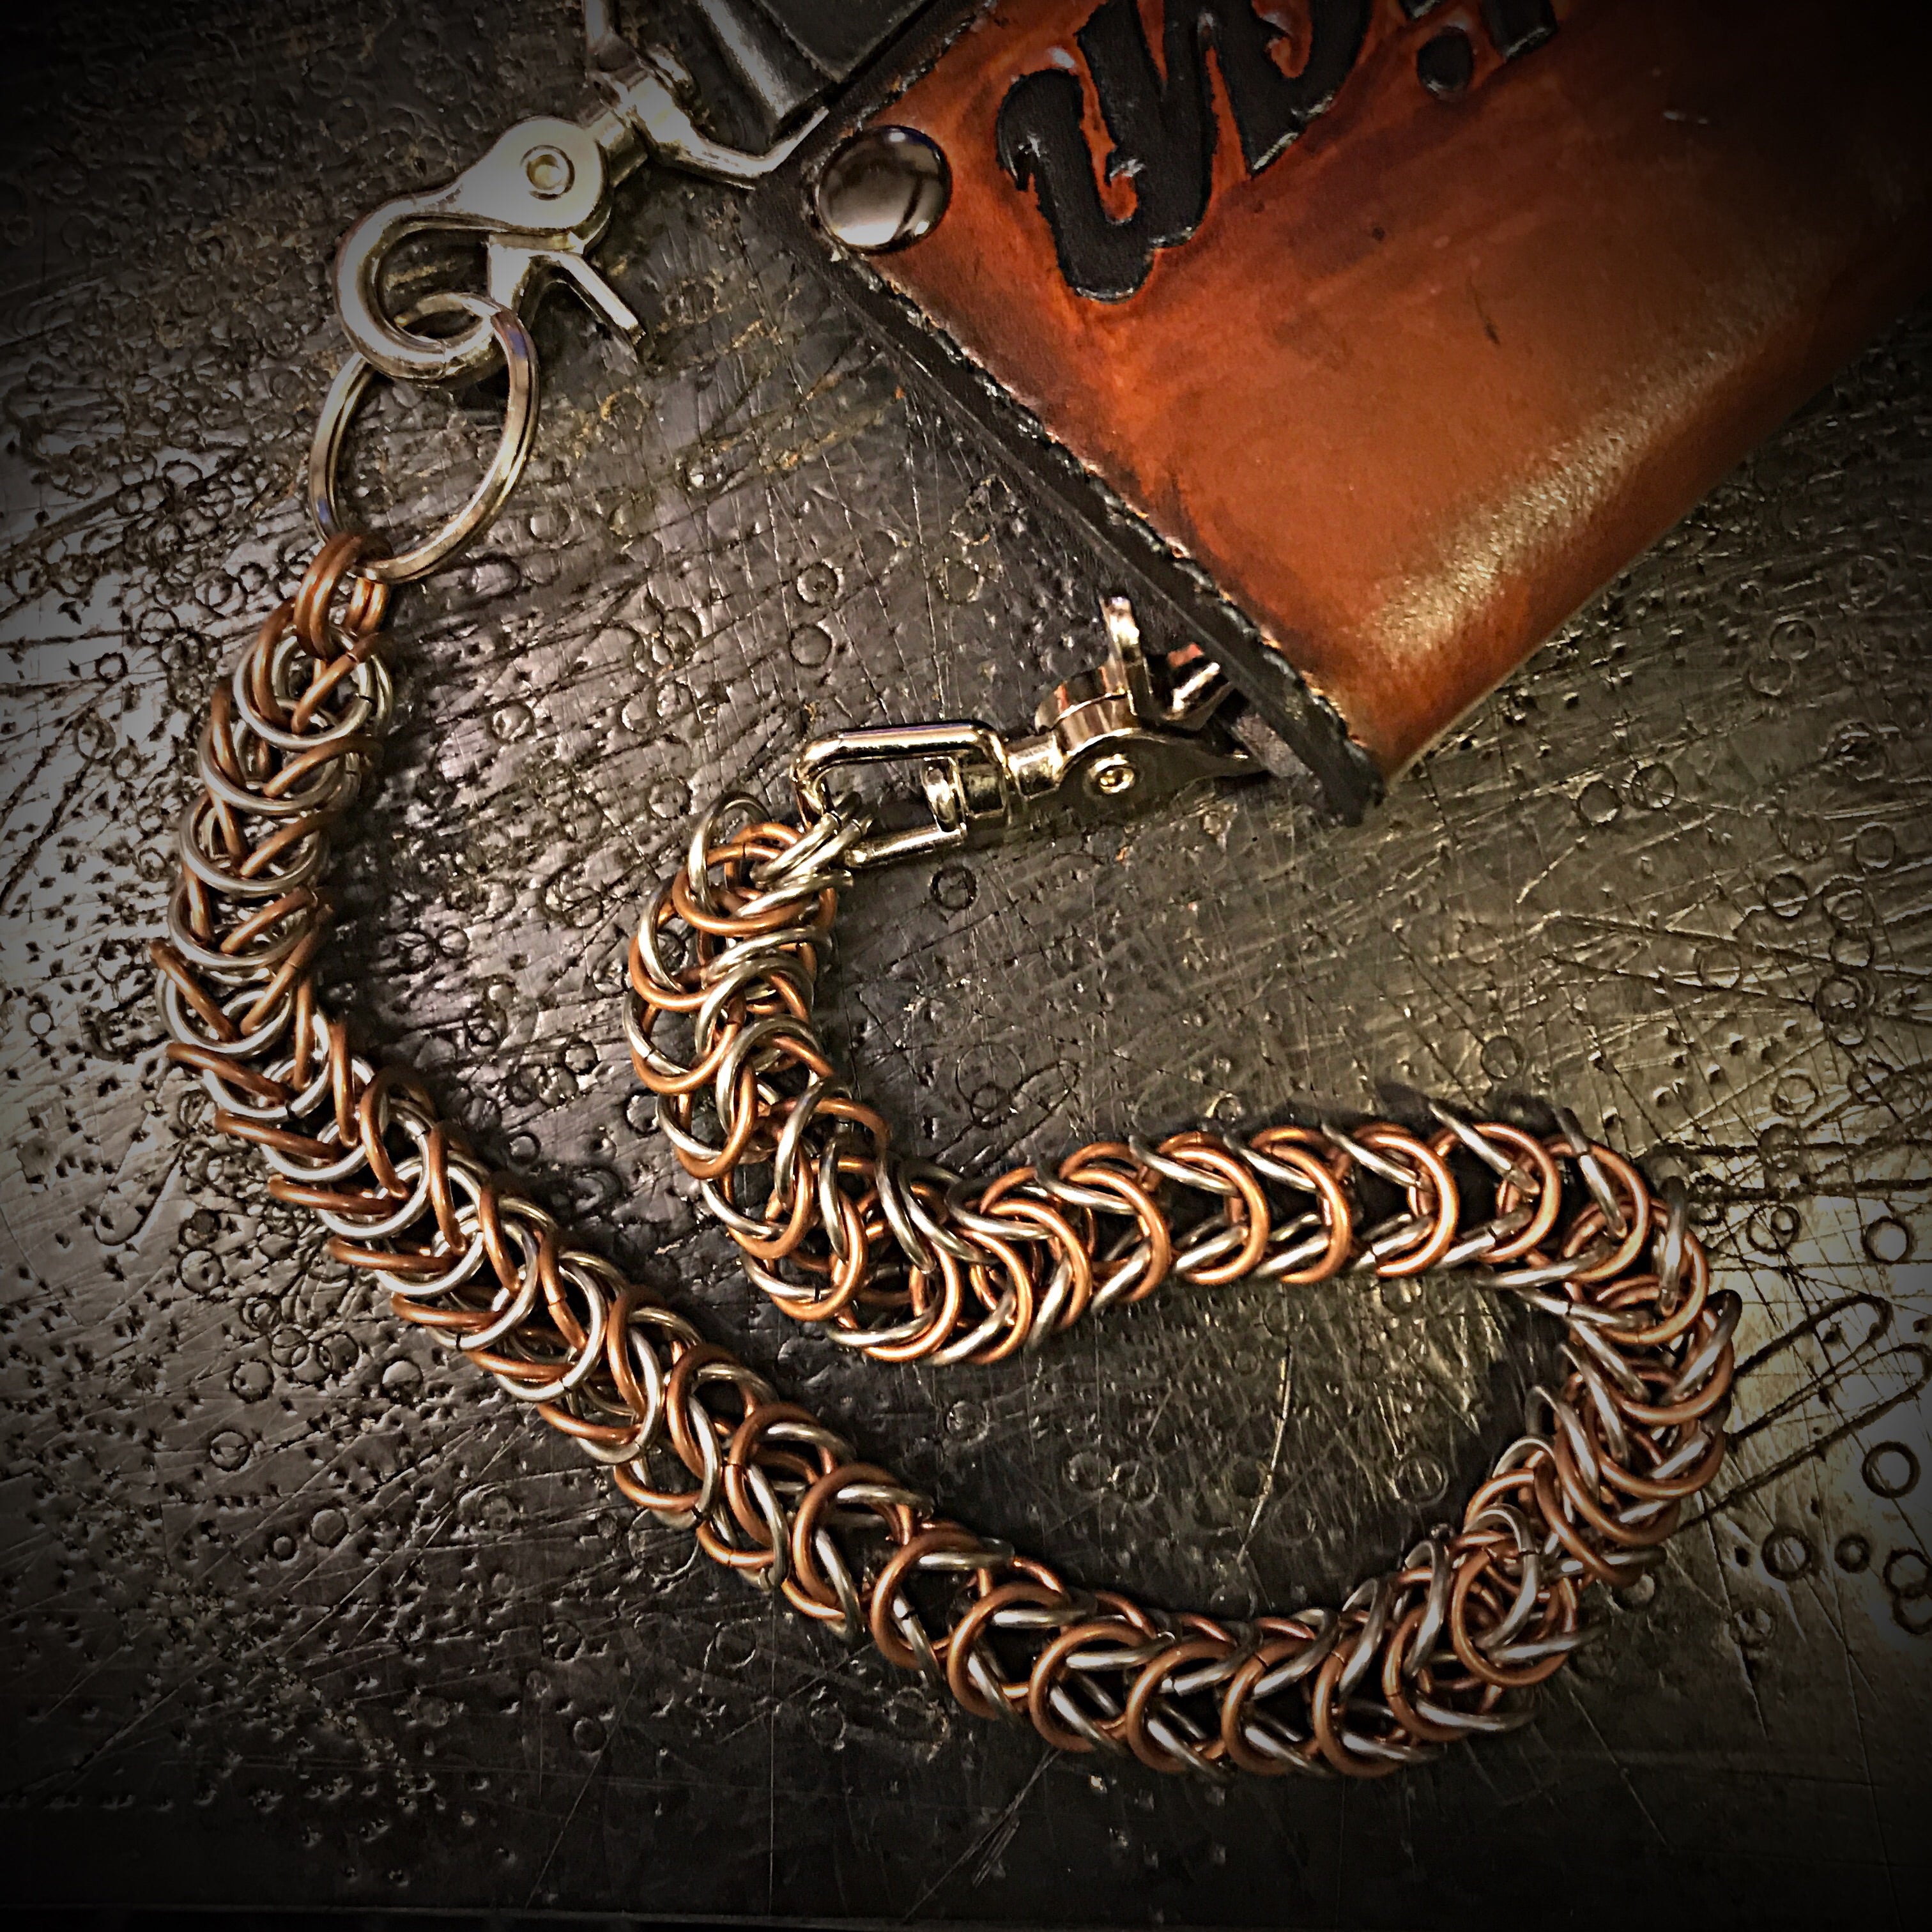 Copper Chainmail Persephone Square Knot Pendant Adjustable